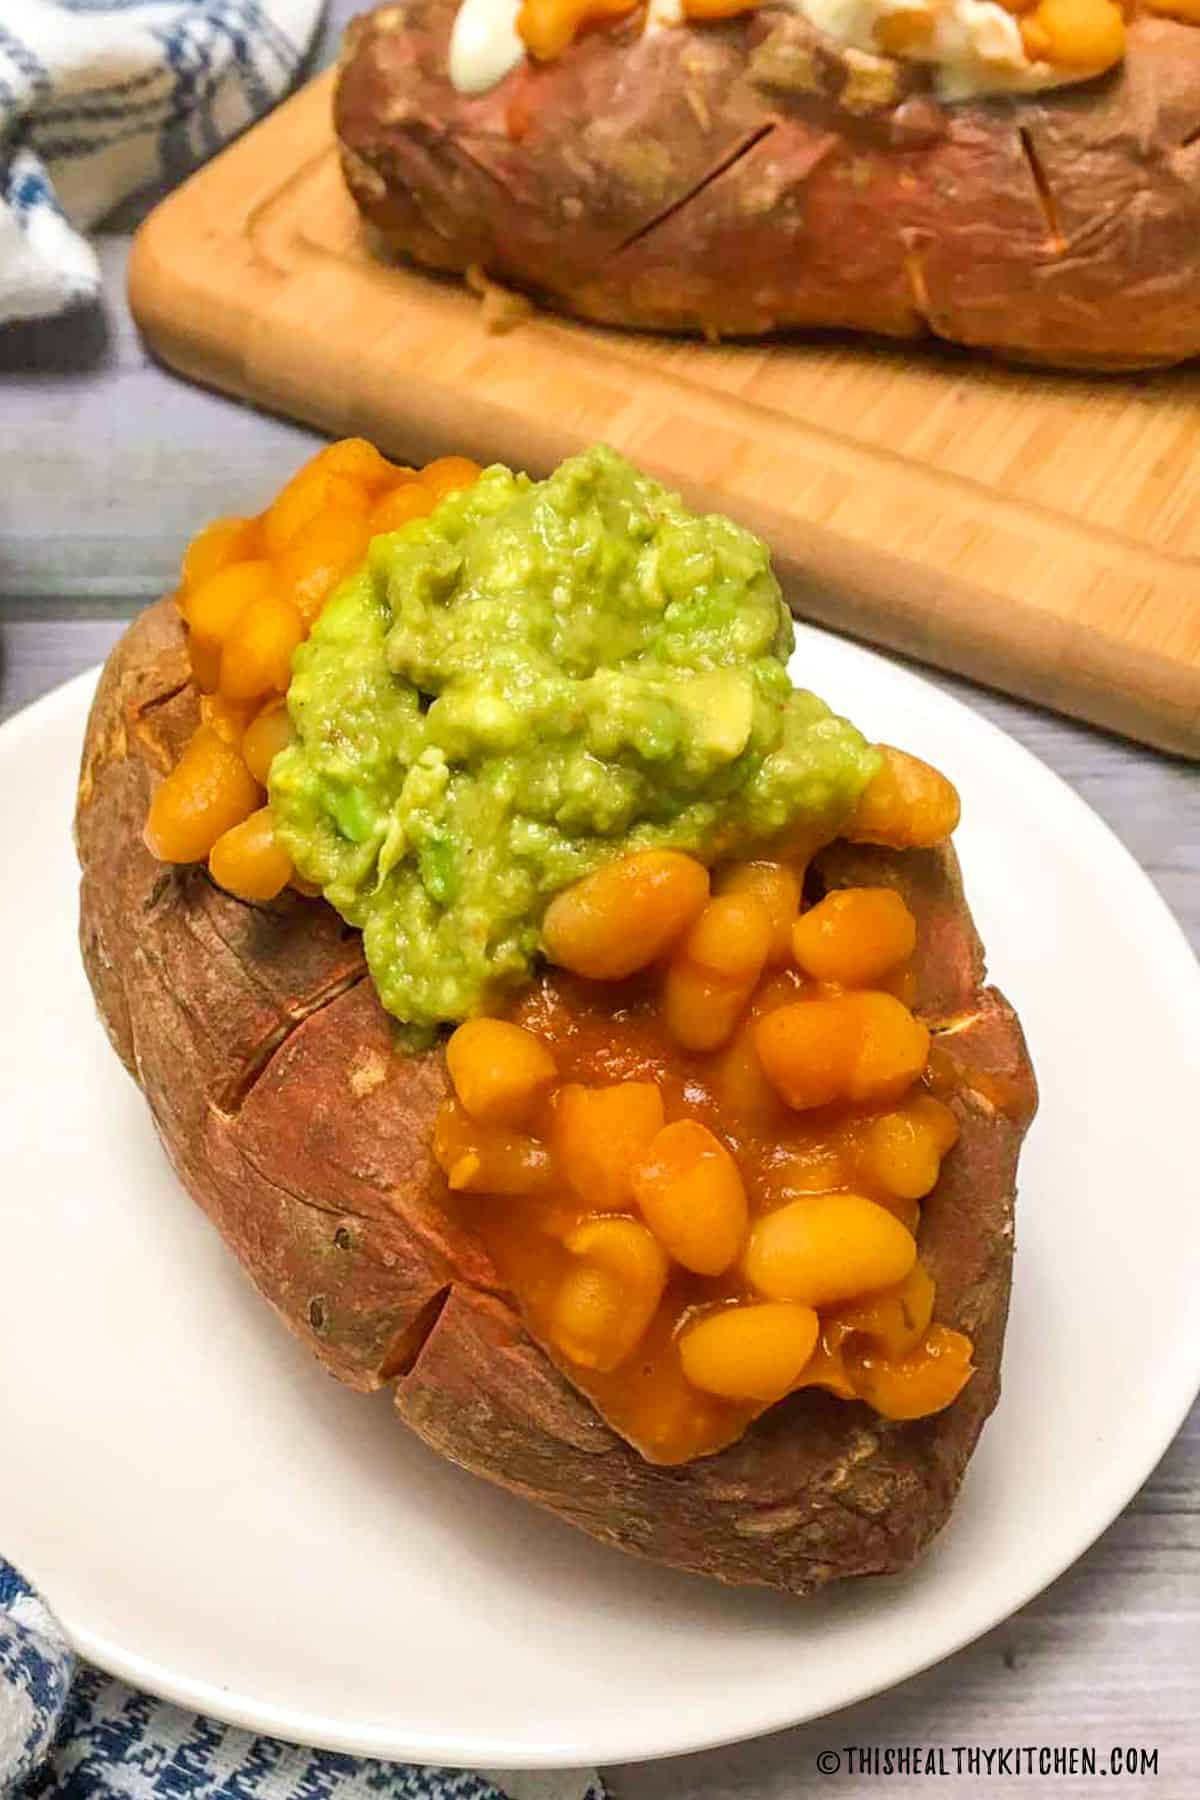 Baked sweet potato with baked beans and guacamole on top.